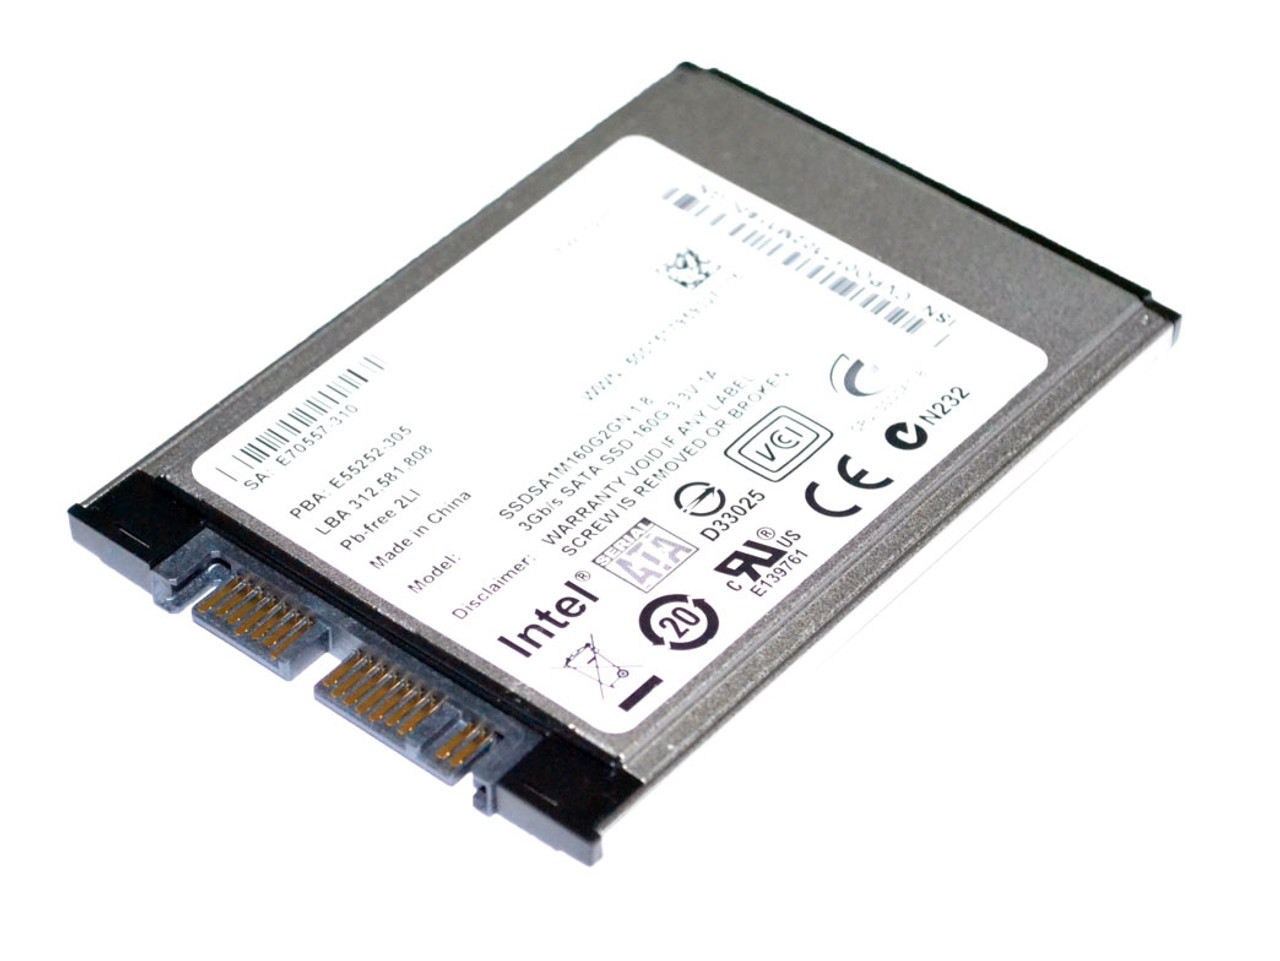 Intel SSDSA1M160G2HP - 160GB 3GB/s MLC 1.8" X18-M Solid State SSD Hard Disk Drive for Notebook Computers - CPU Medics